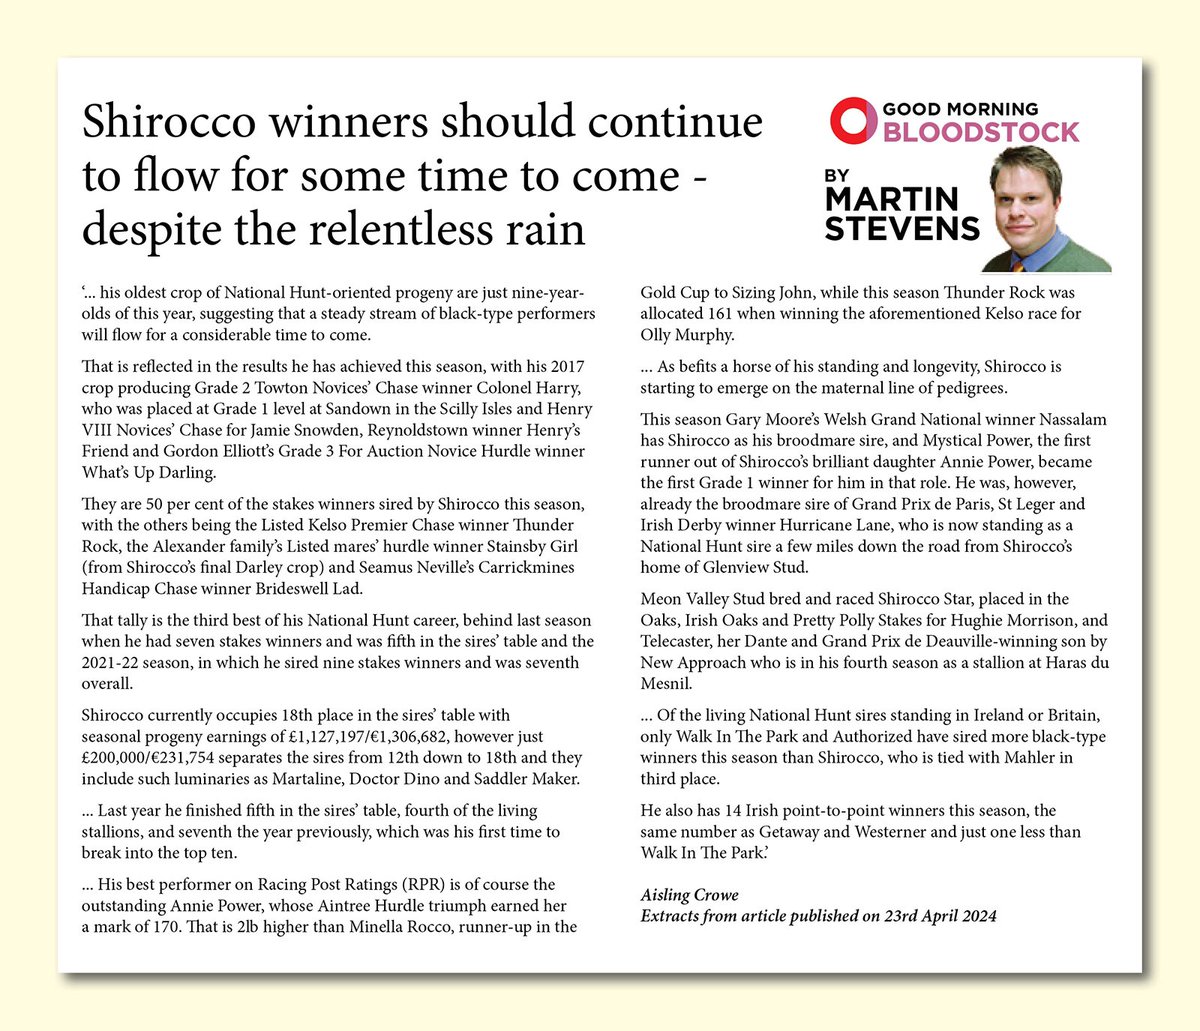 Check out the recent spotlight on the incredible success of SHIROCCO as a sire by @AisCrowe in Good Morning Bloodstock! If you haven't already, catch up on some of the standout excerpts below👇 @MartinStevensB1 @rpbloodstock